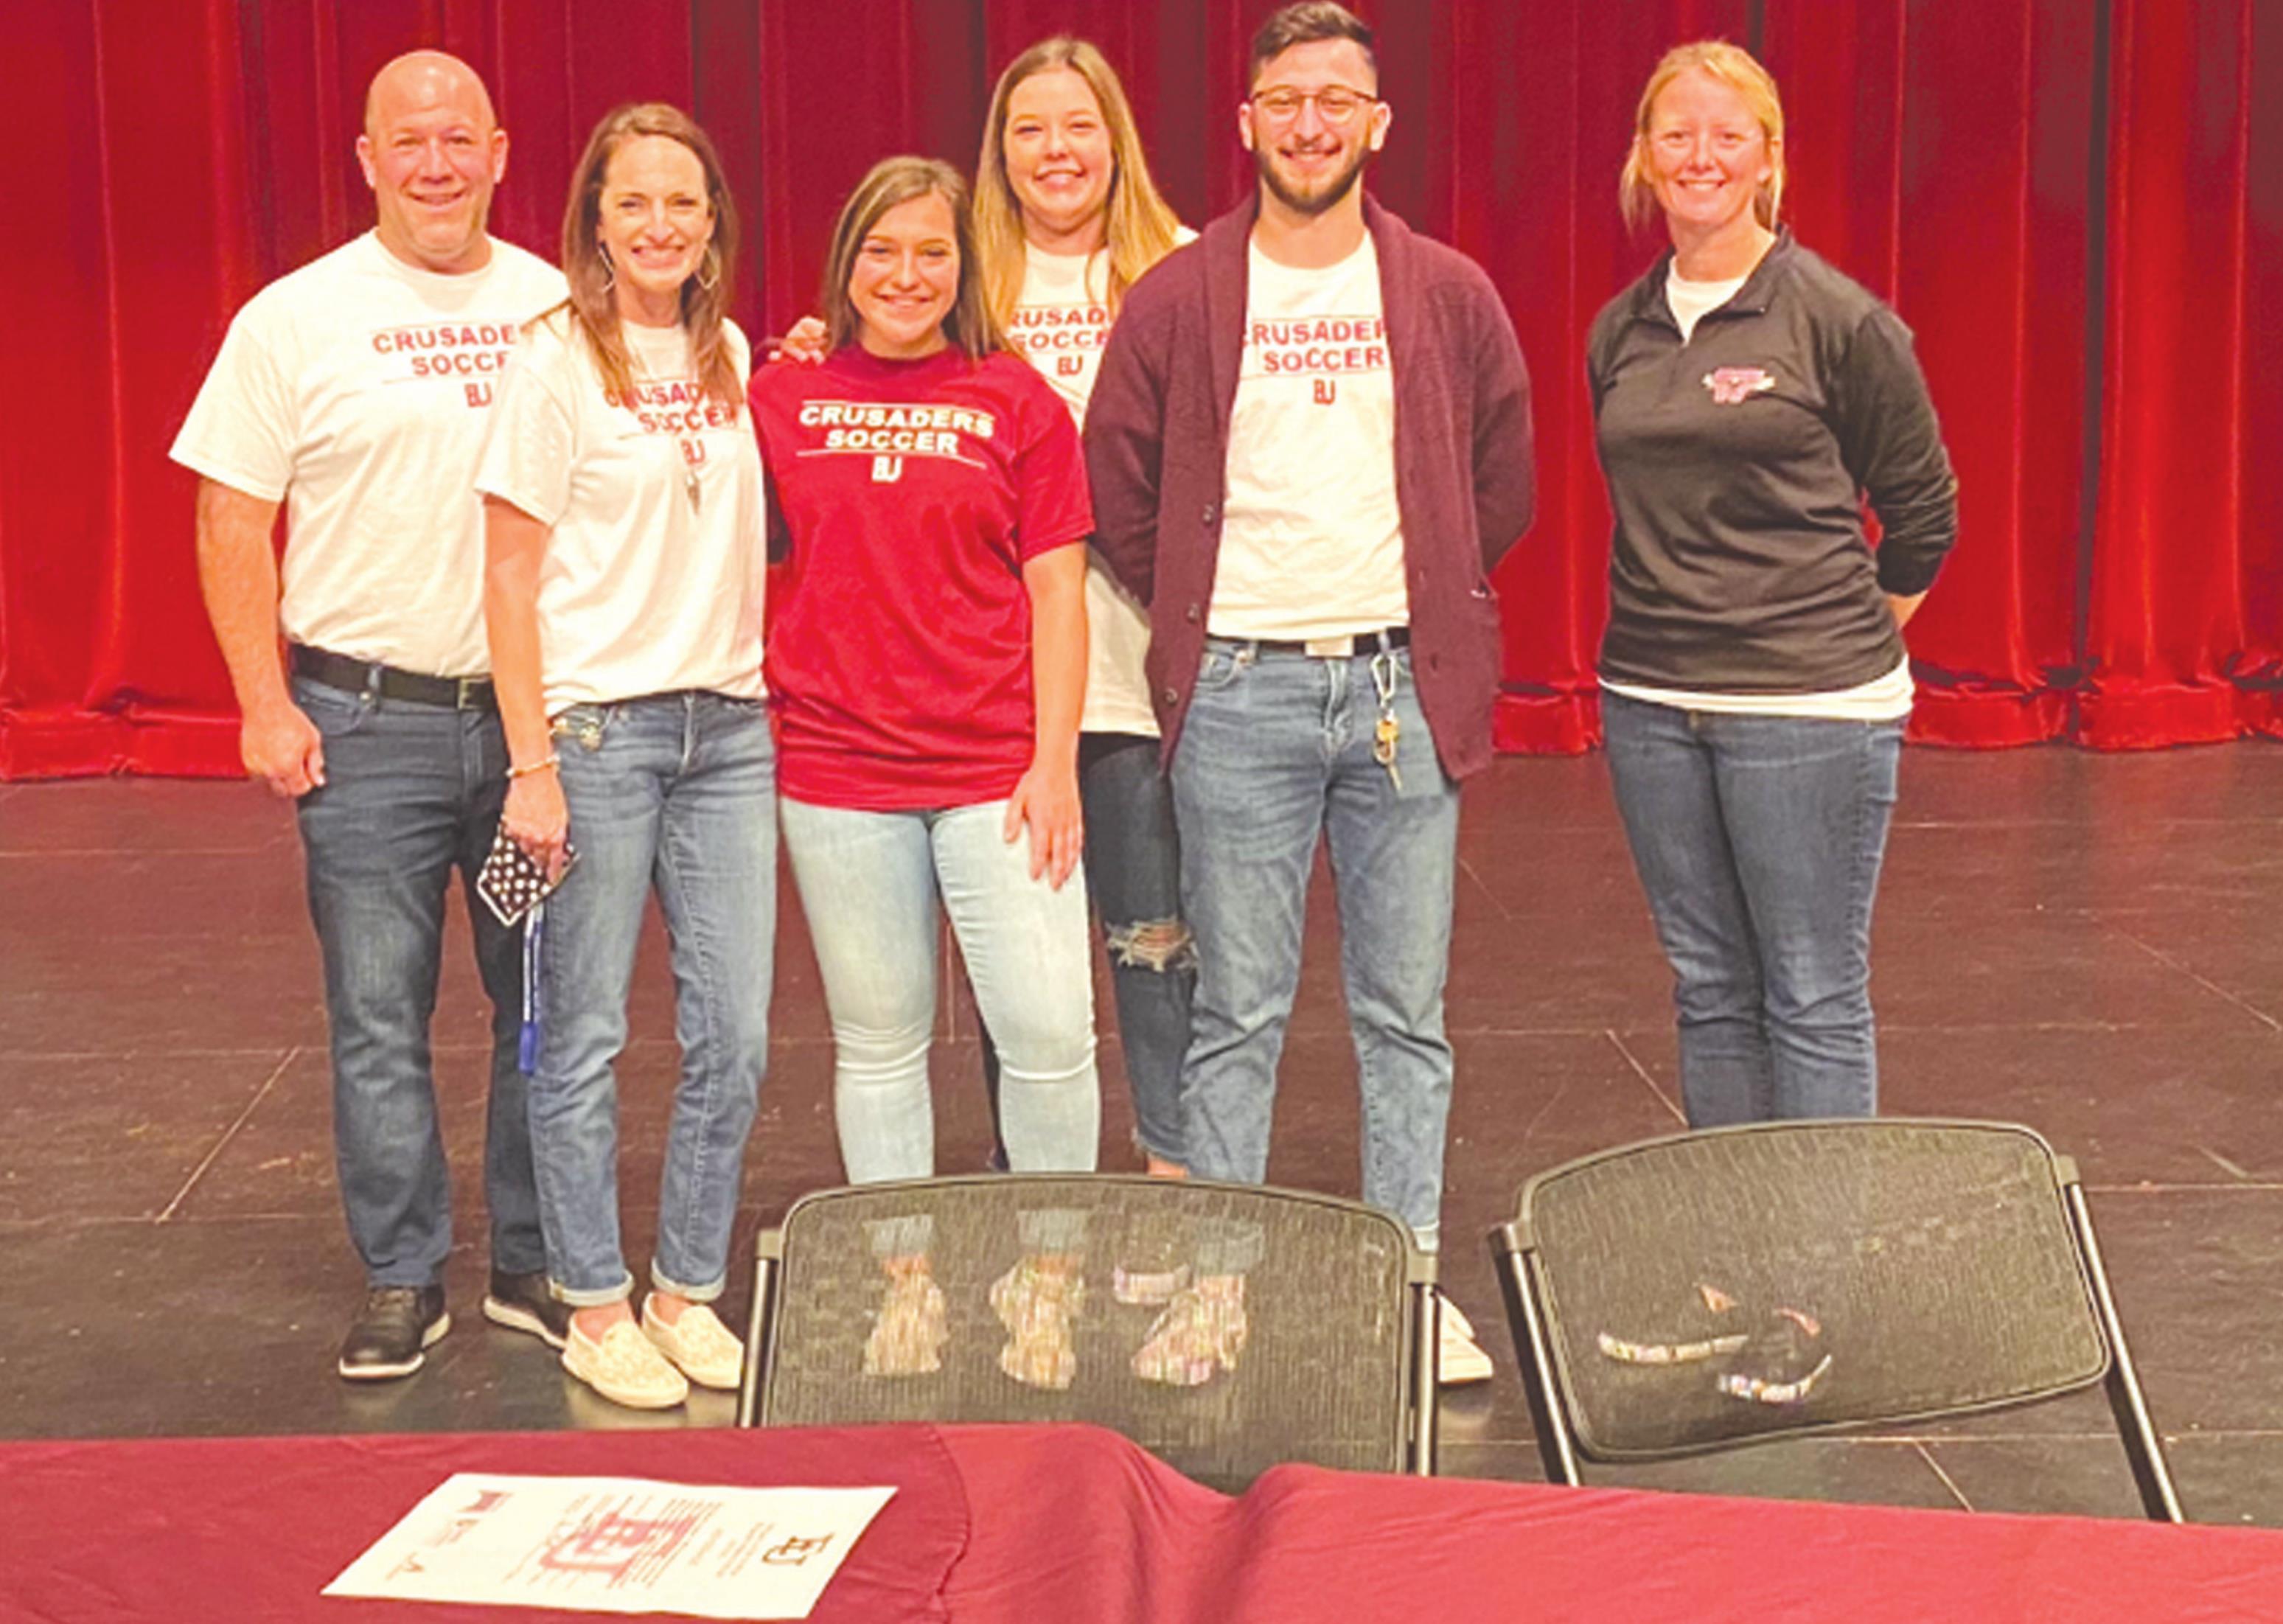 Above, Weatherford senior soccer player Addy Hicks signed to play college soccer at Evangel University in Springfield, Missouri. Pictured, from left are her parents, Nate and Jolie Hicks, her siblings, Brooklyn and Dylon Hicks, and head coach, Delydia Givens. Josh Jennings/WDN